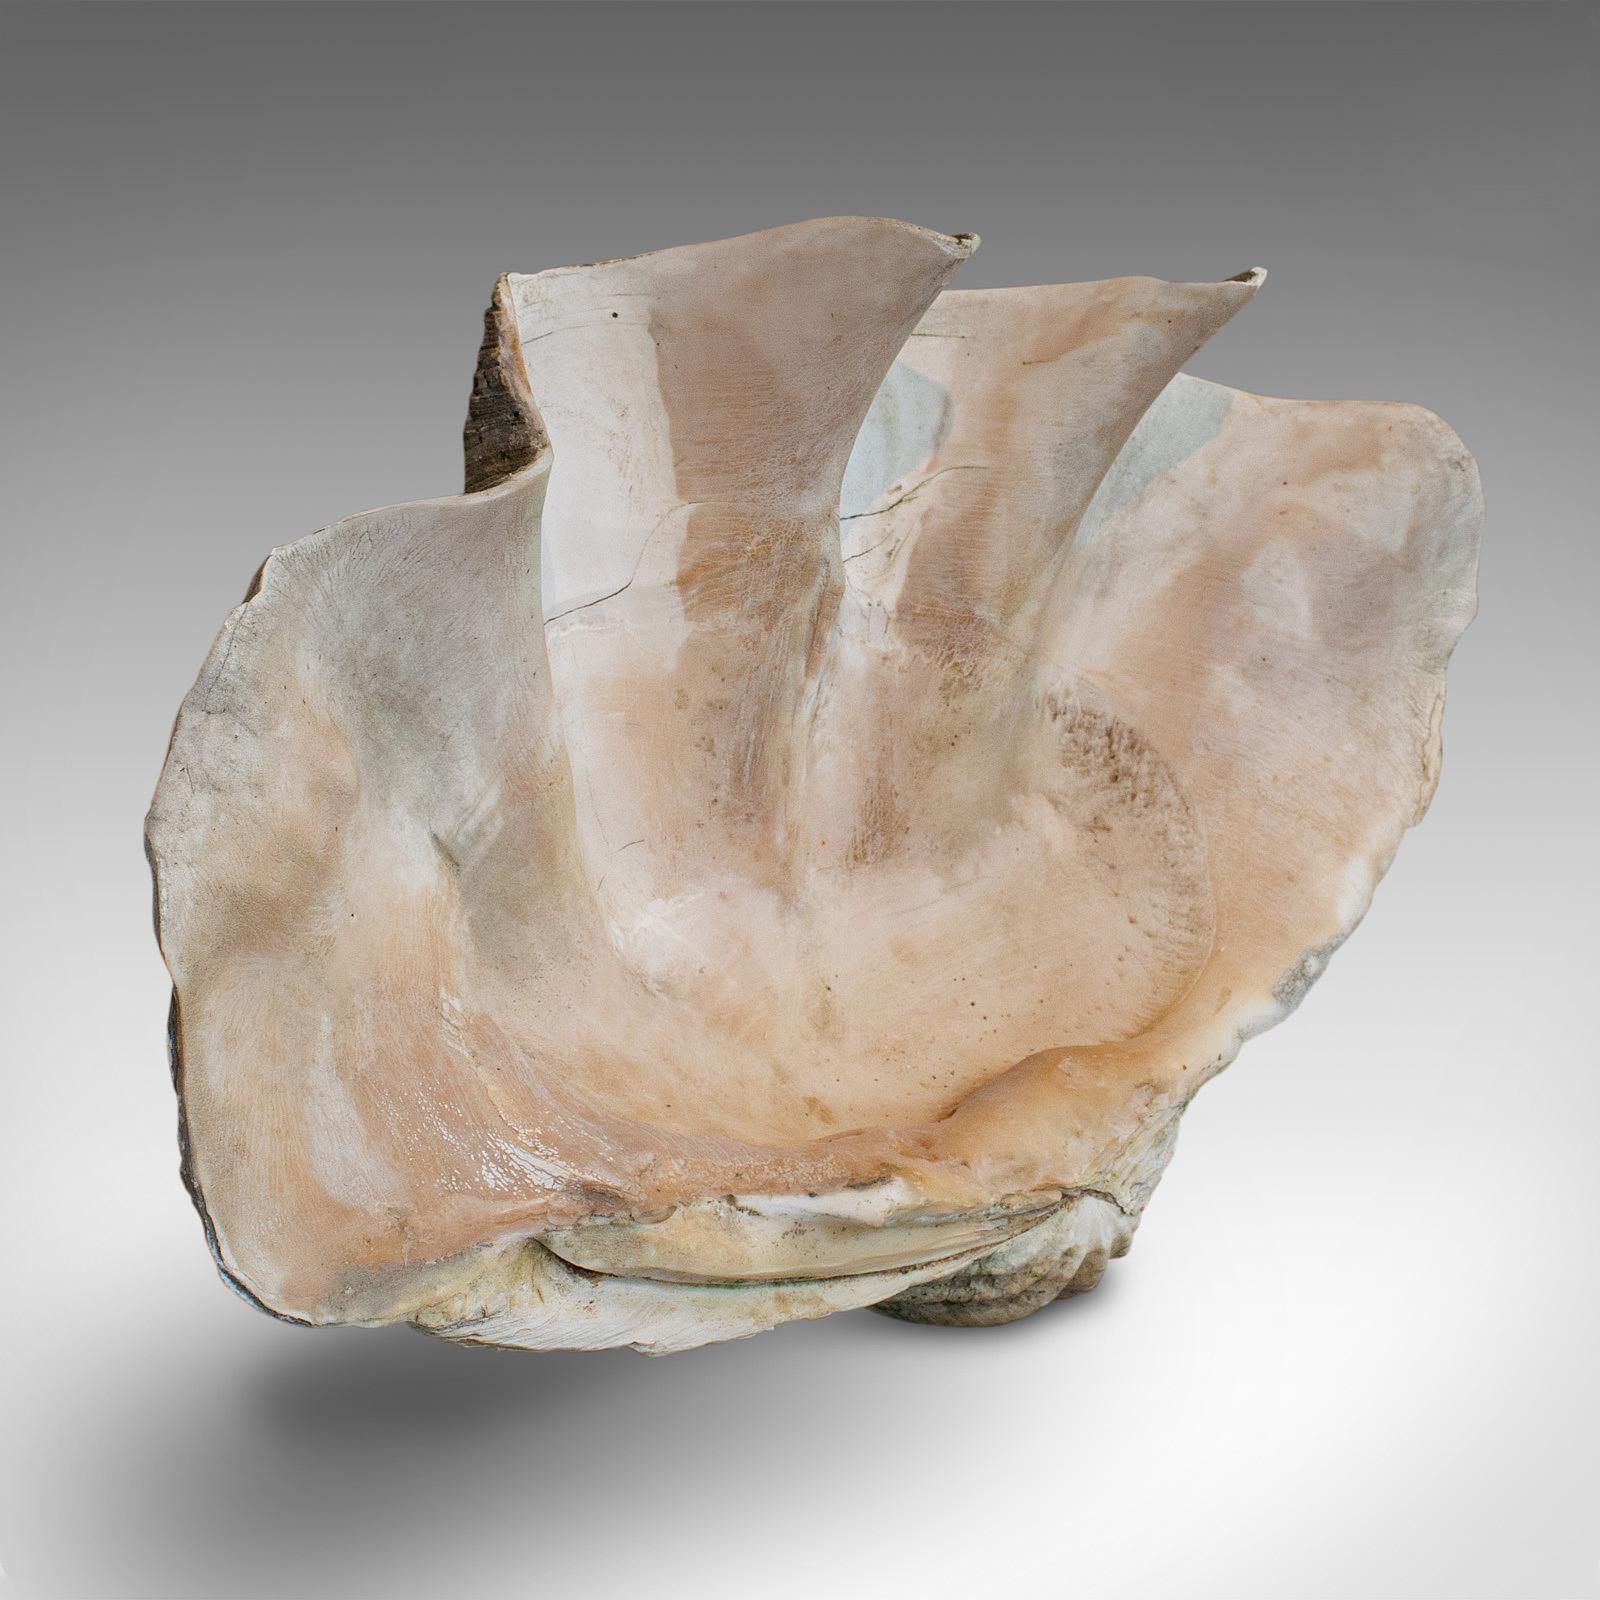 This is a set of antique giant clam shells. From Pacific waters, this wonderfully weathered trio of natural Tridacna Gigas display shells date to the late 19th century, circa 1900.

A superb set of decorative shells
Displays a desirable aged